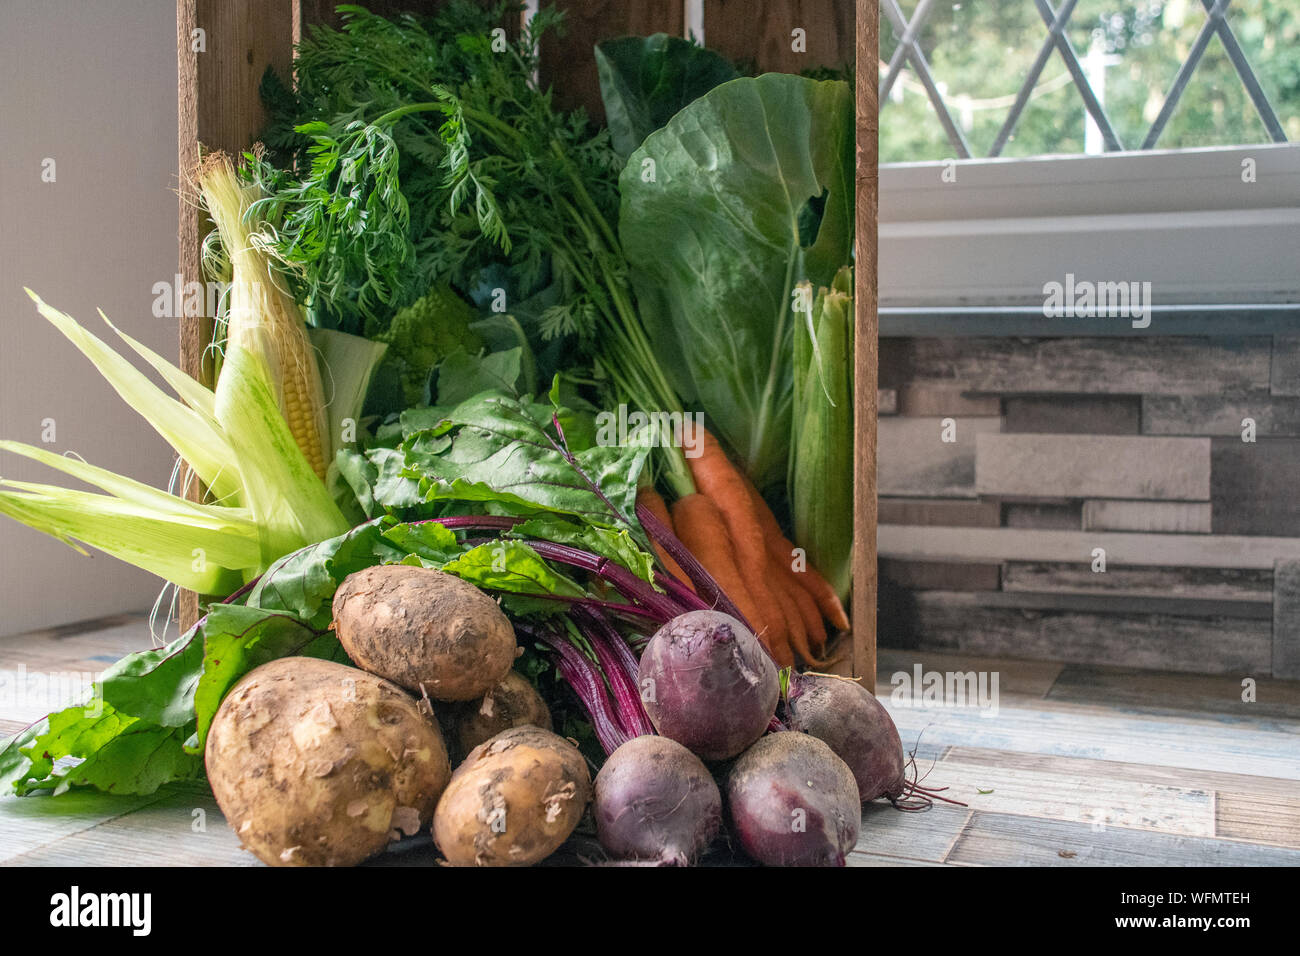 Five a day, healthy lifestyle options. Freshly picked vegetables straight out of the ground and collected. Stock Photo